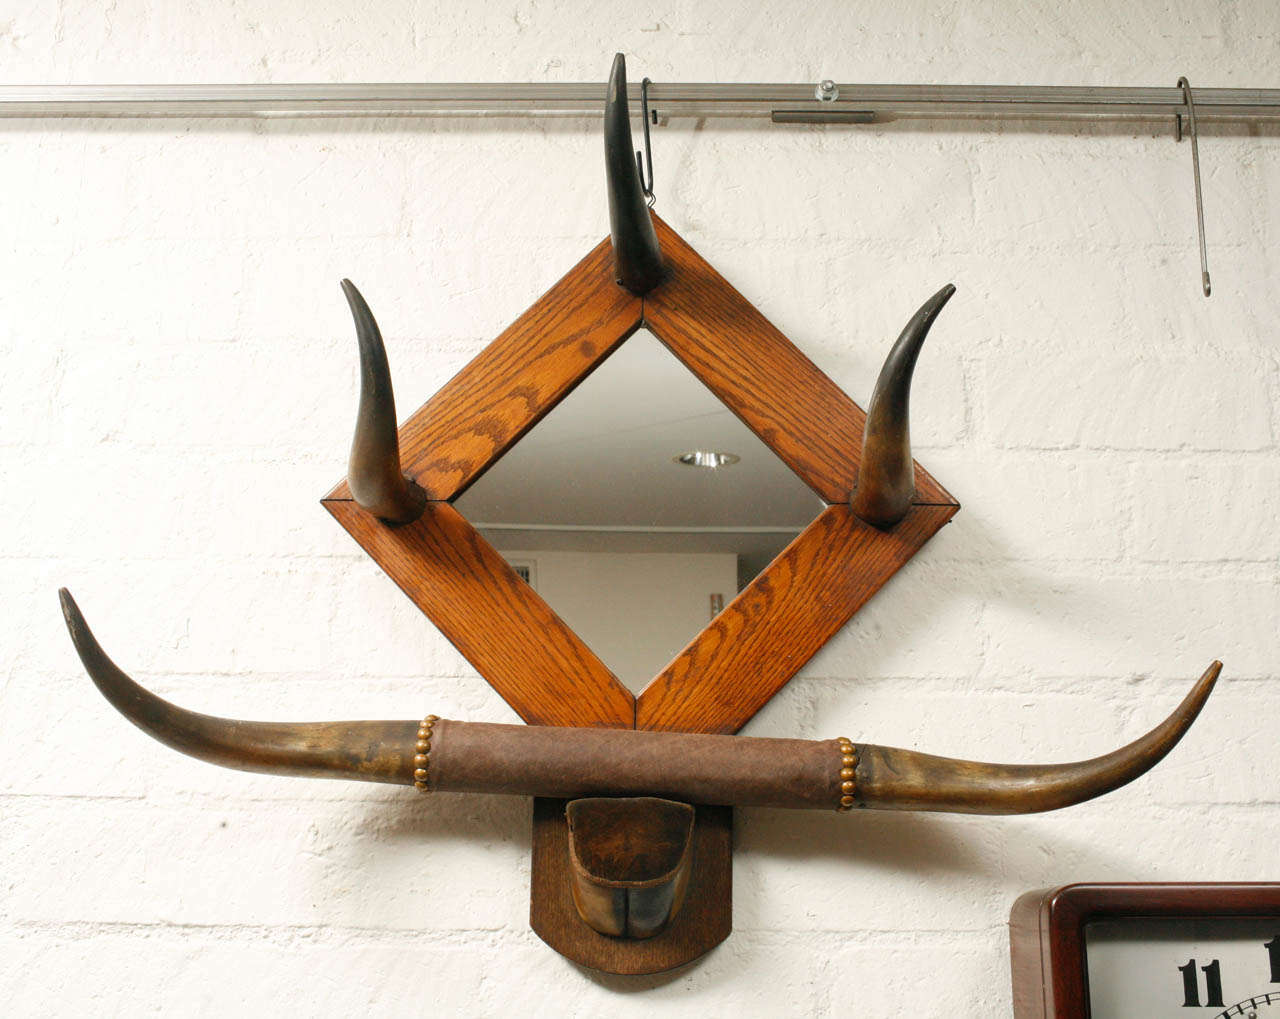 This exceptionally unique horn hat rack with mirror will add utility and interest to a variety of settings. The piece carries the design aesthetics and craftsmanship of an Arts and Crafts era item. Some of its special details include an original